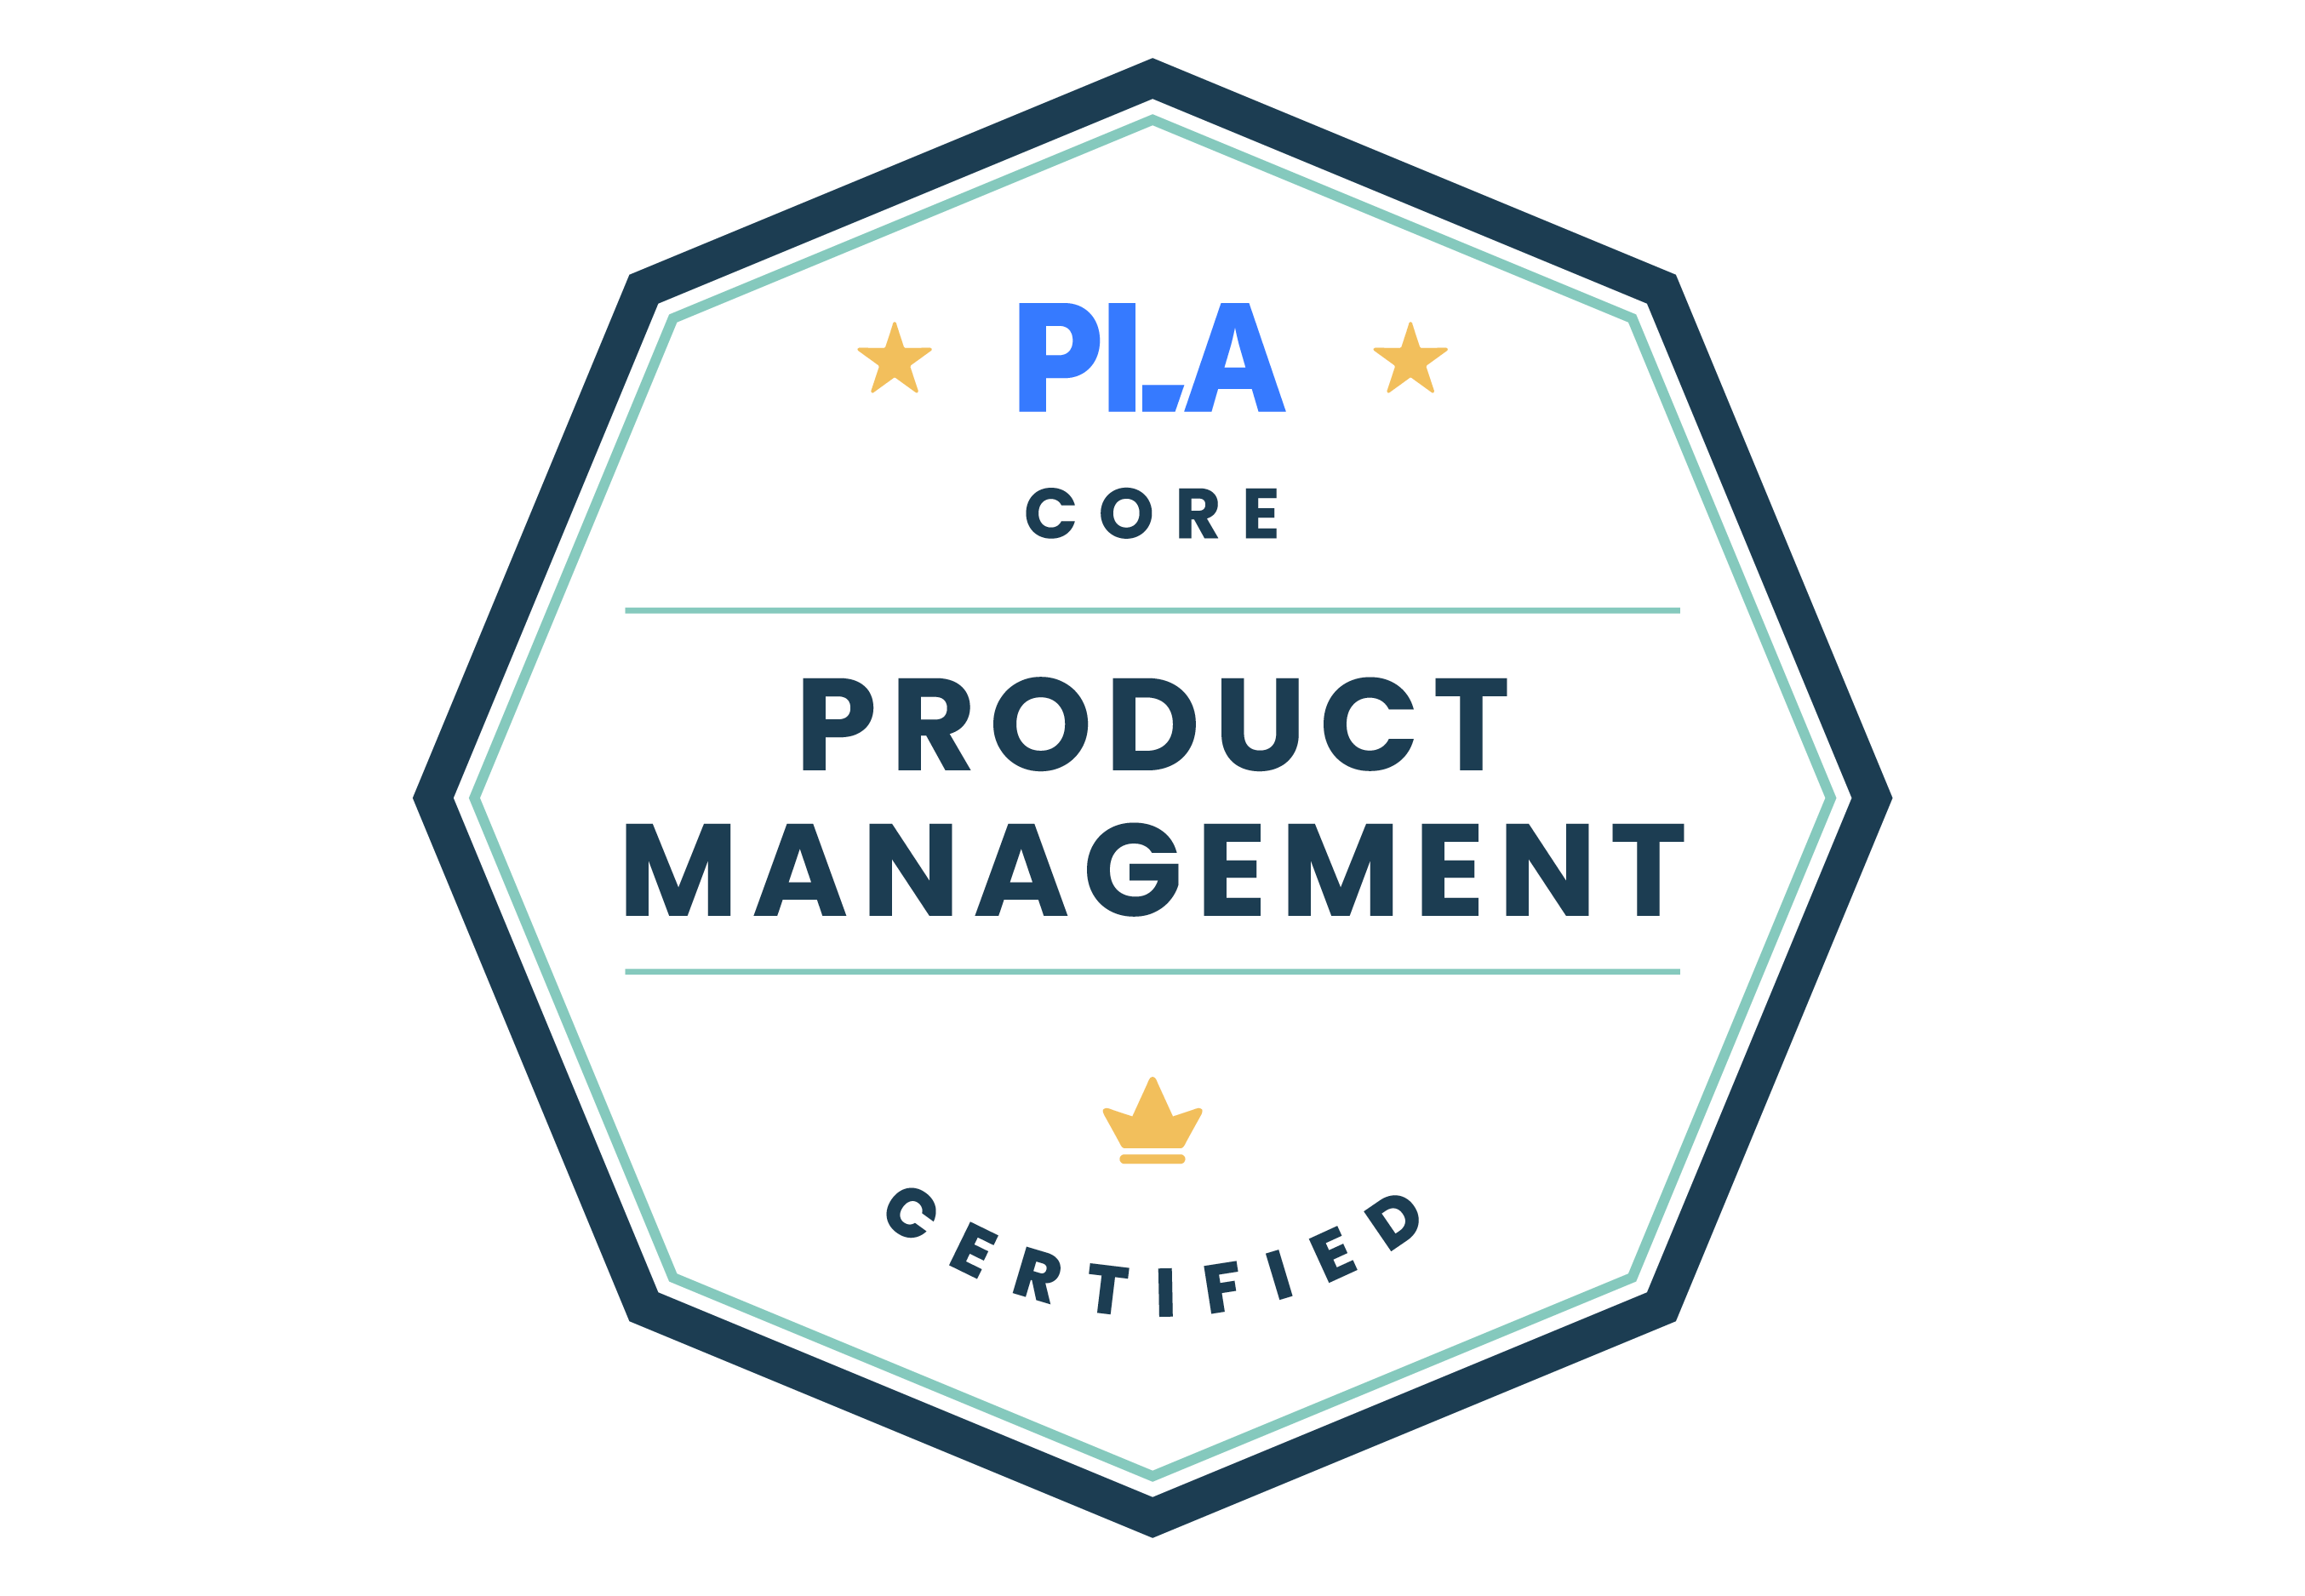 Product Management Certified: Core badge